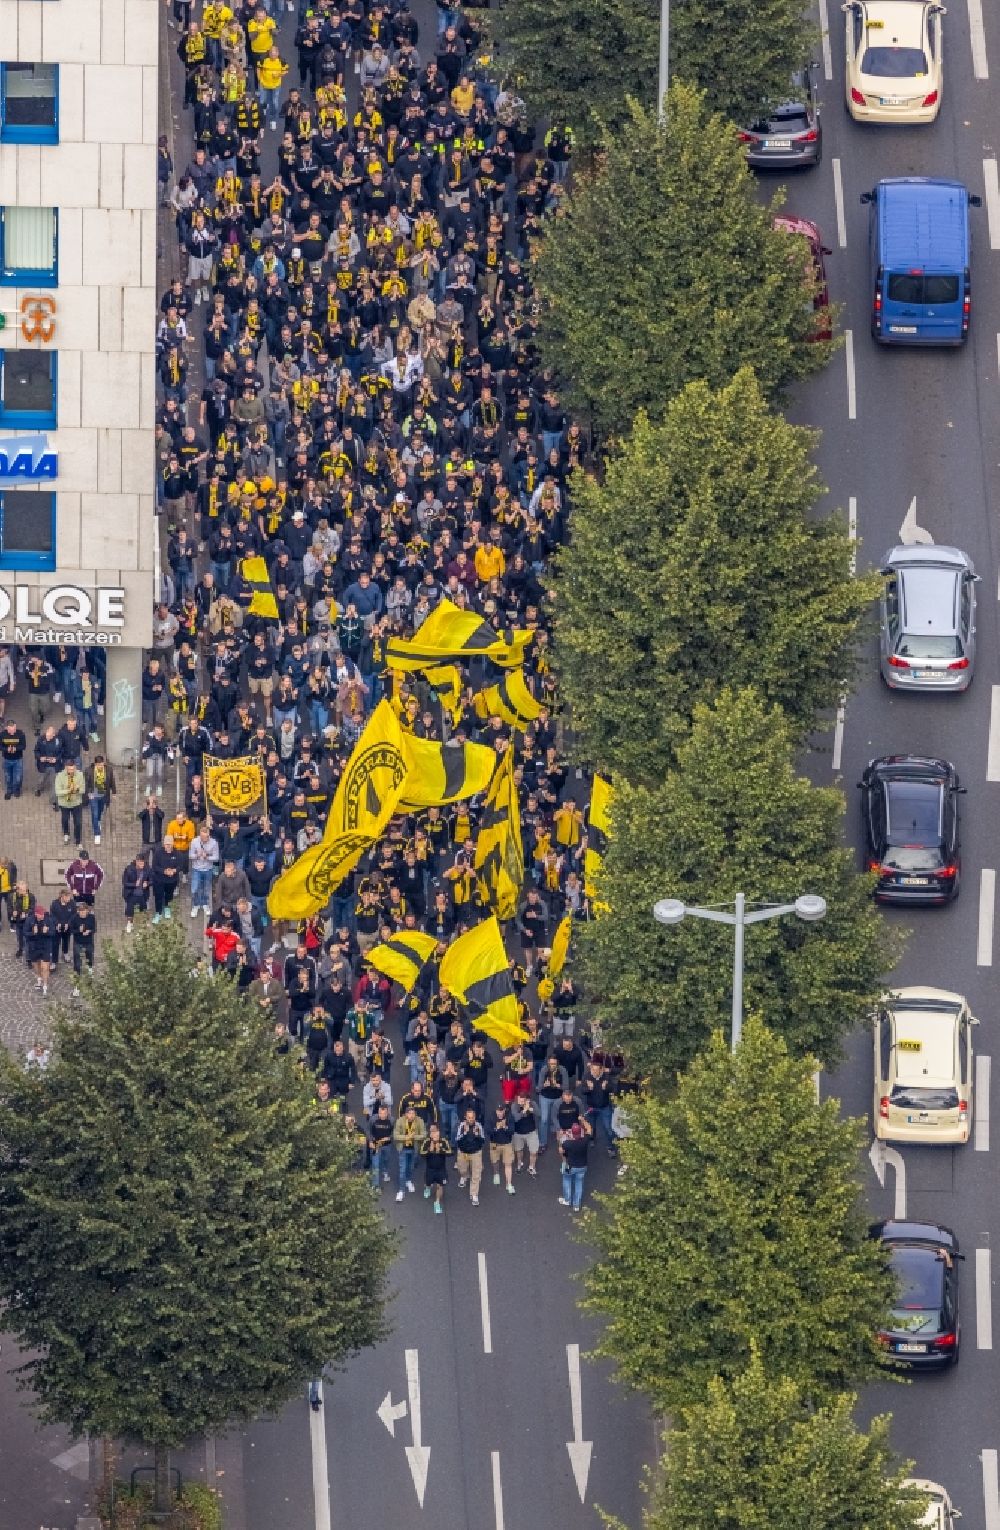 Dortmund from the bird's eye view: Participants - fans of the BVB football club on their way to the football match on the corner of Poststrasse and Hohe Strasse in Dortmund at Ruhrgebiet in the state North Rhine-Westphalia, Germany